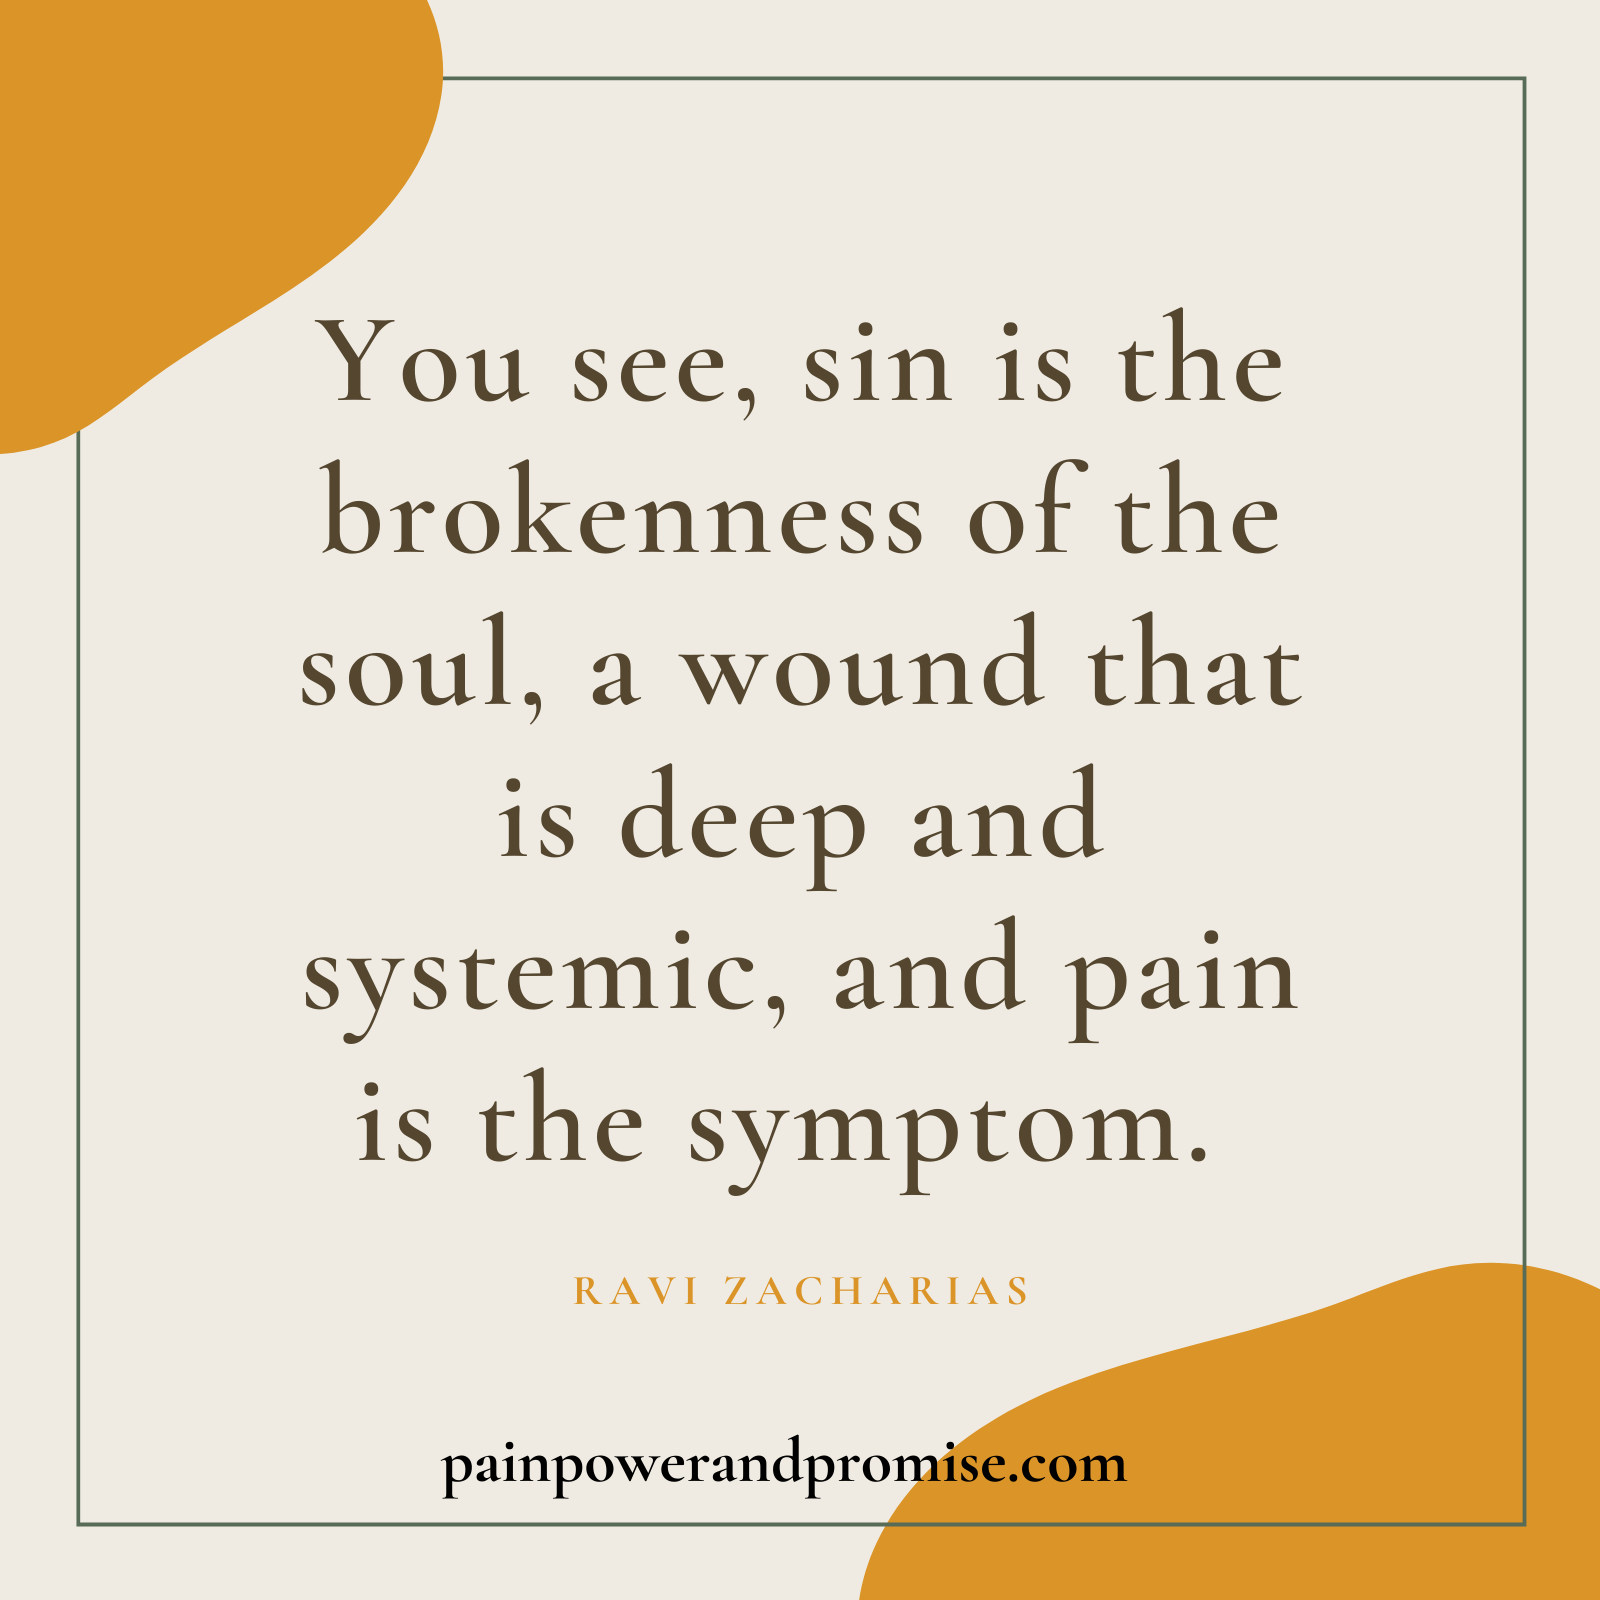 You see, sin is the brokenness of the soul, a wound that is deep and systemic, and pain is th symptom.